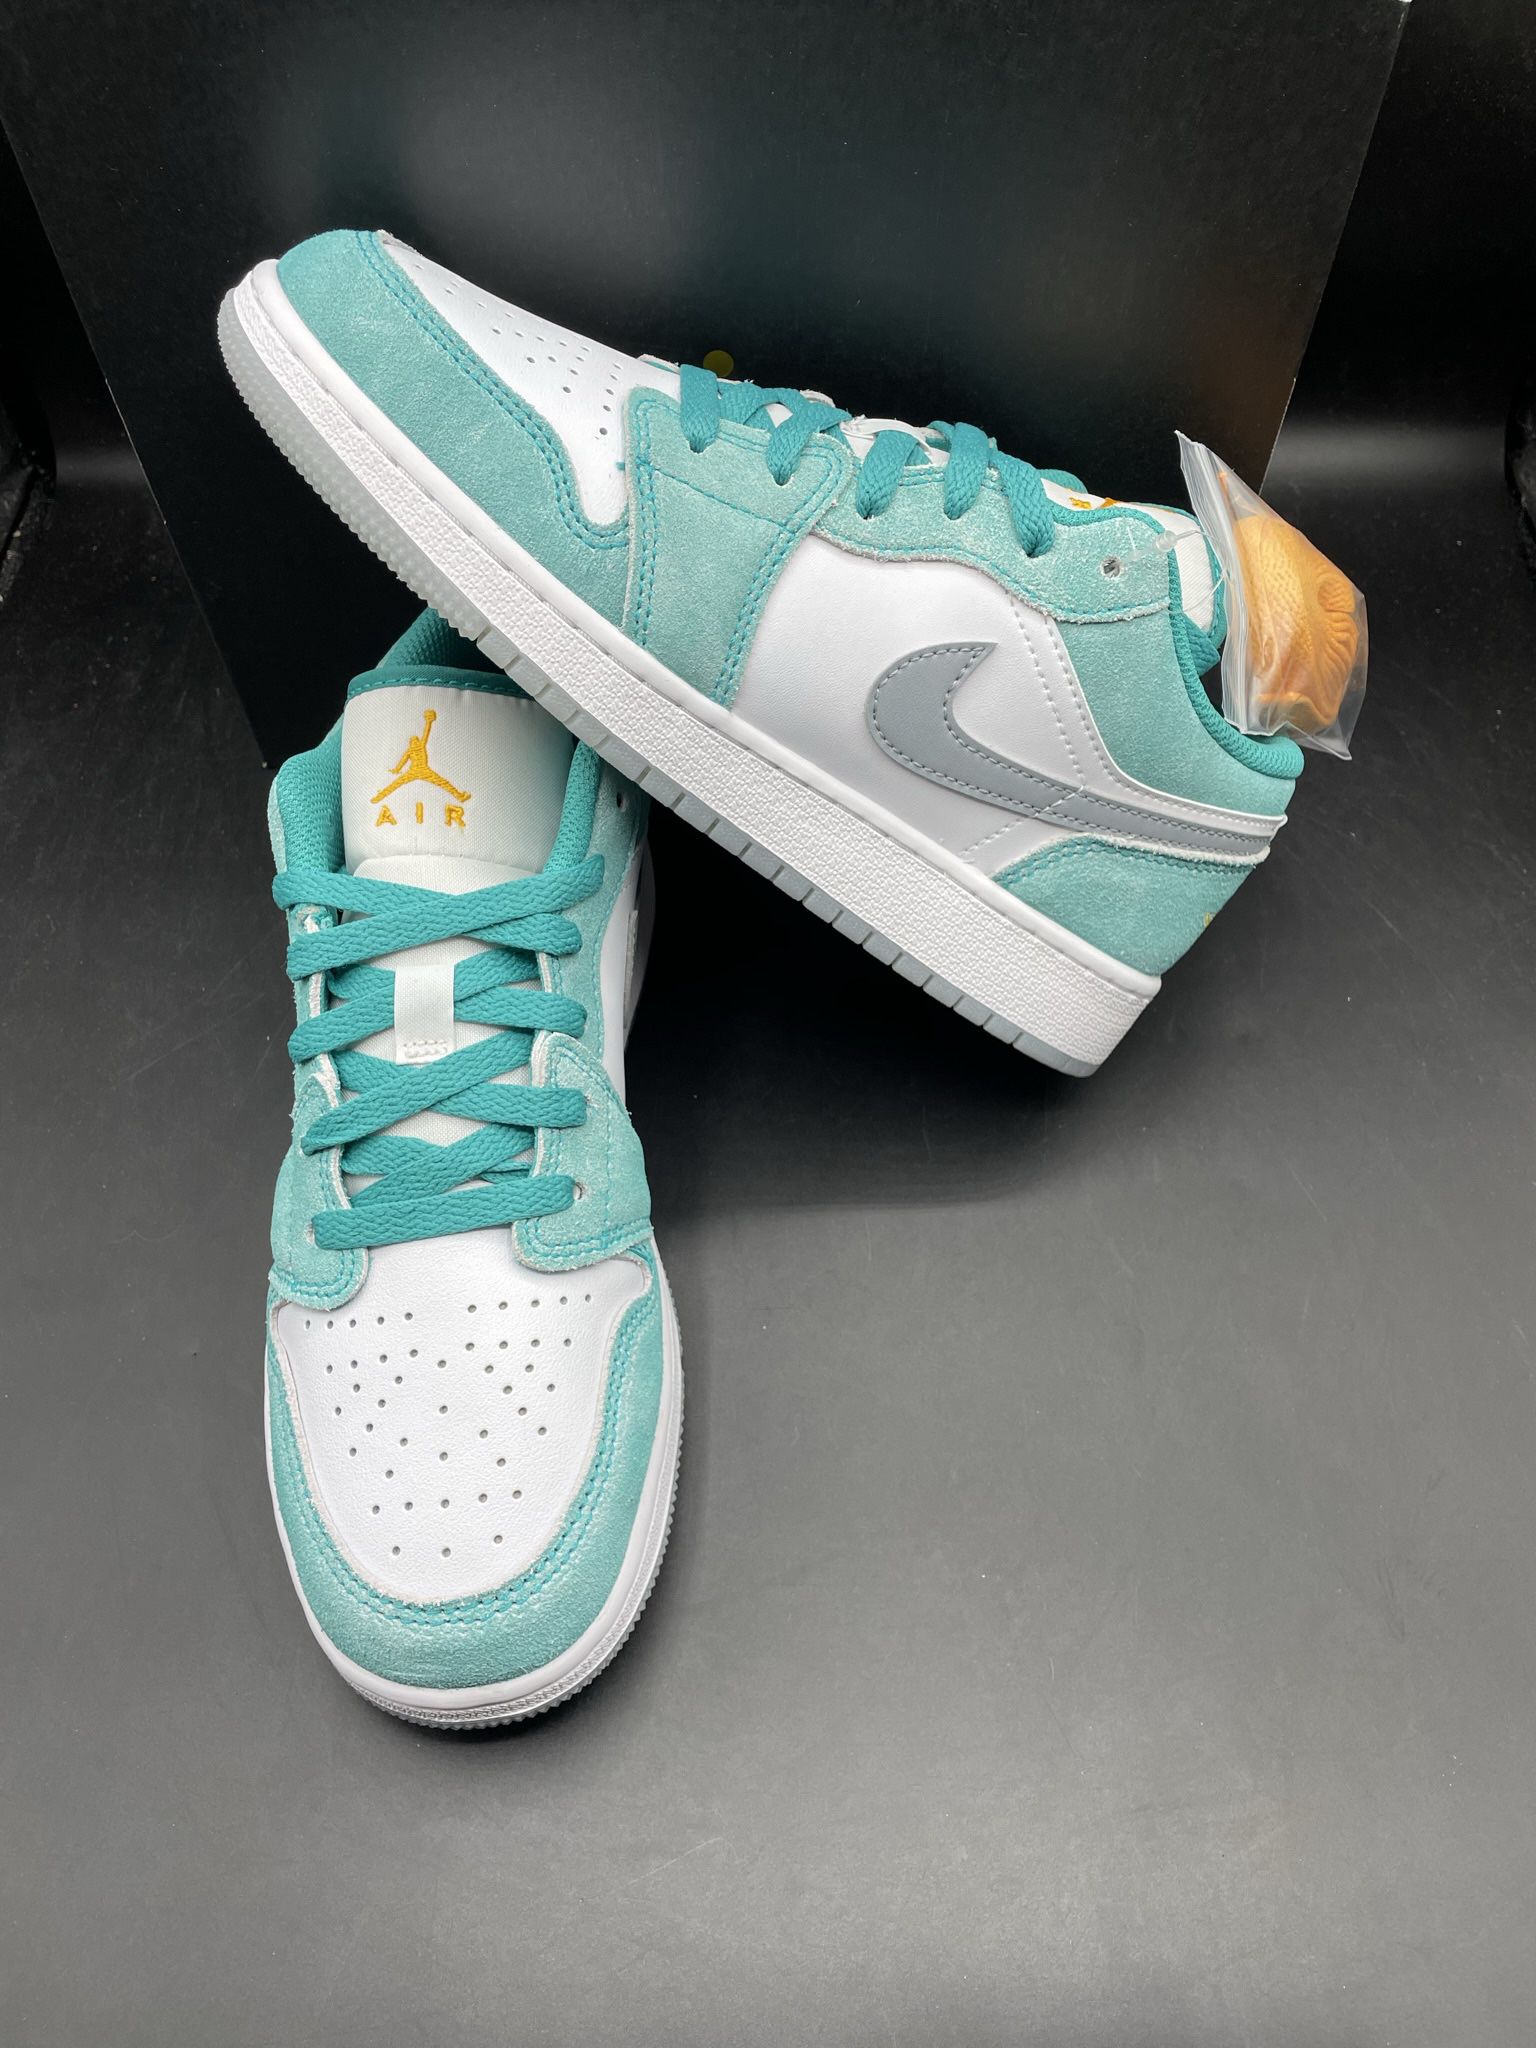 New Nike Air Jordan 1 Low SE GS Emerald White Grey Taxi Size 5.5Y / Fits Women’s 7 